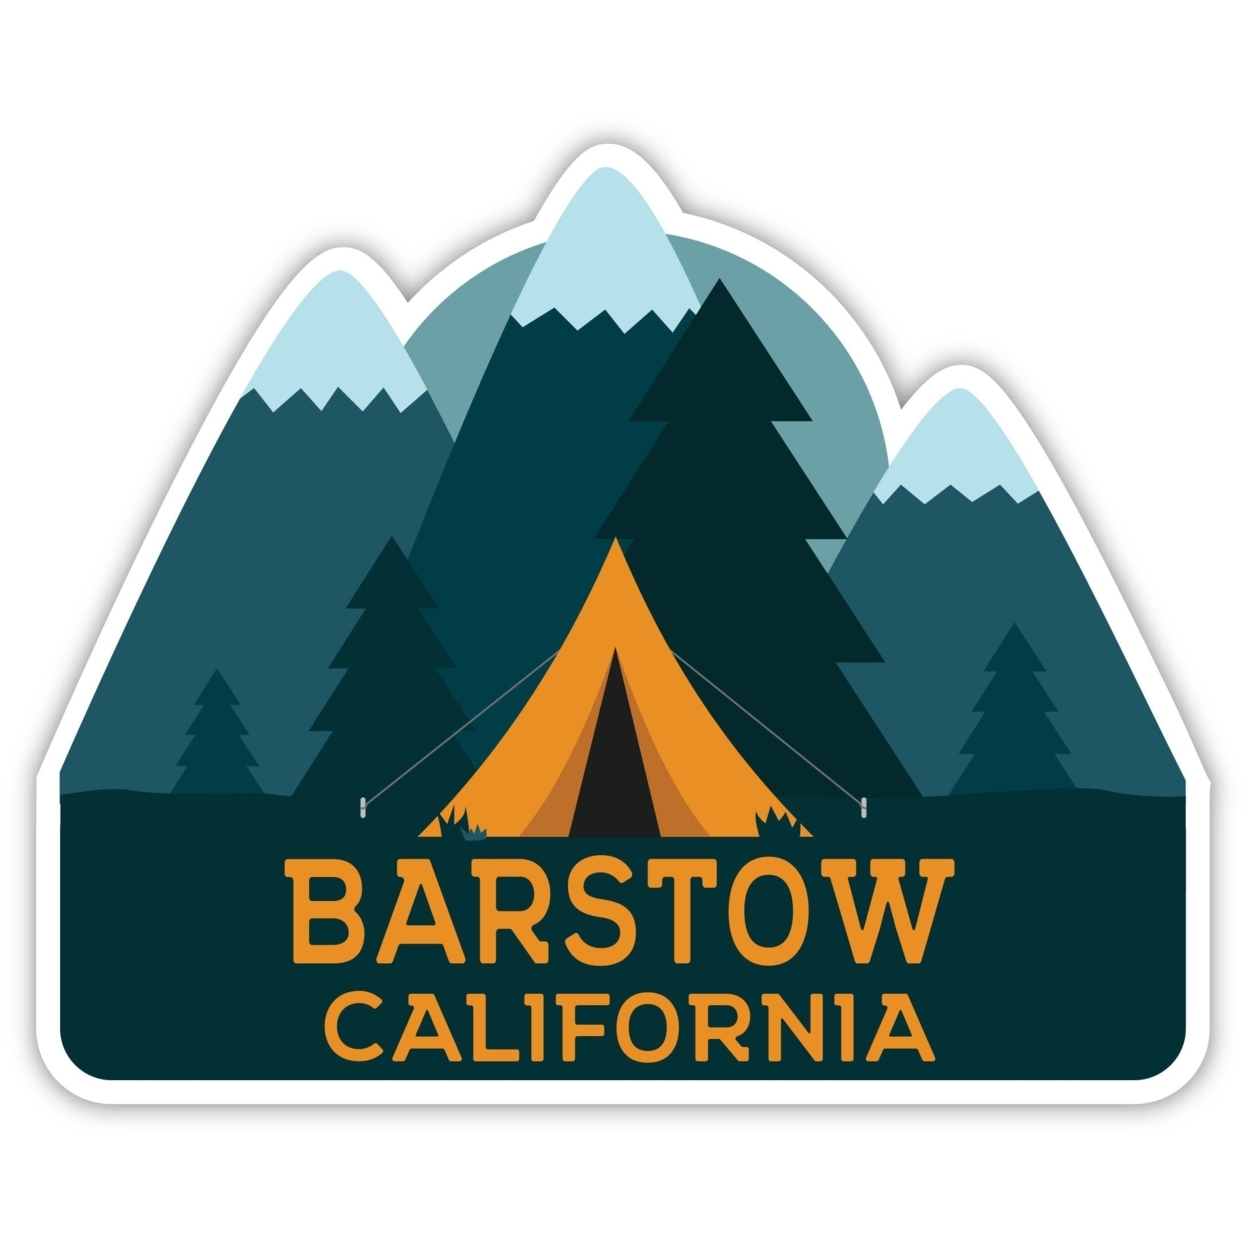 Barstow California Souvenir Decorative Stickers (Choose Theme And Size) - Single Unit, 10-Inch, Camp Life